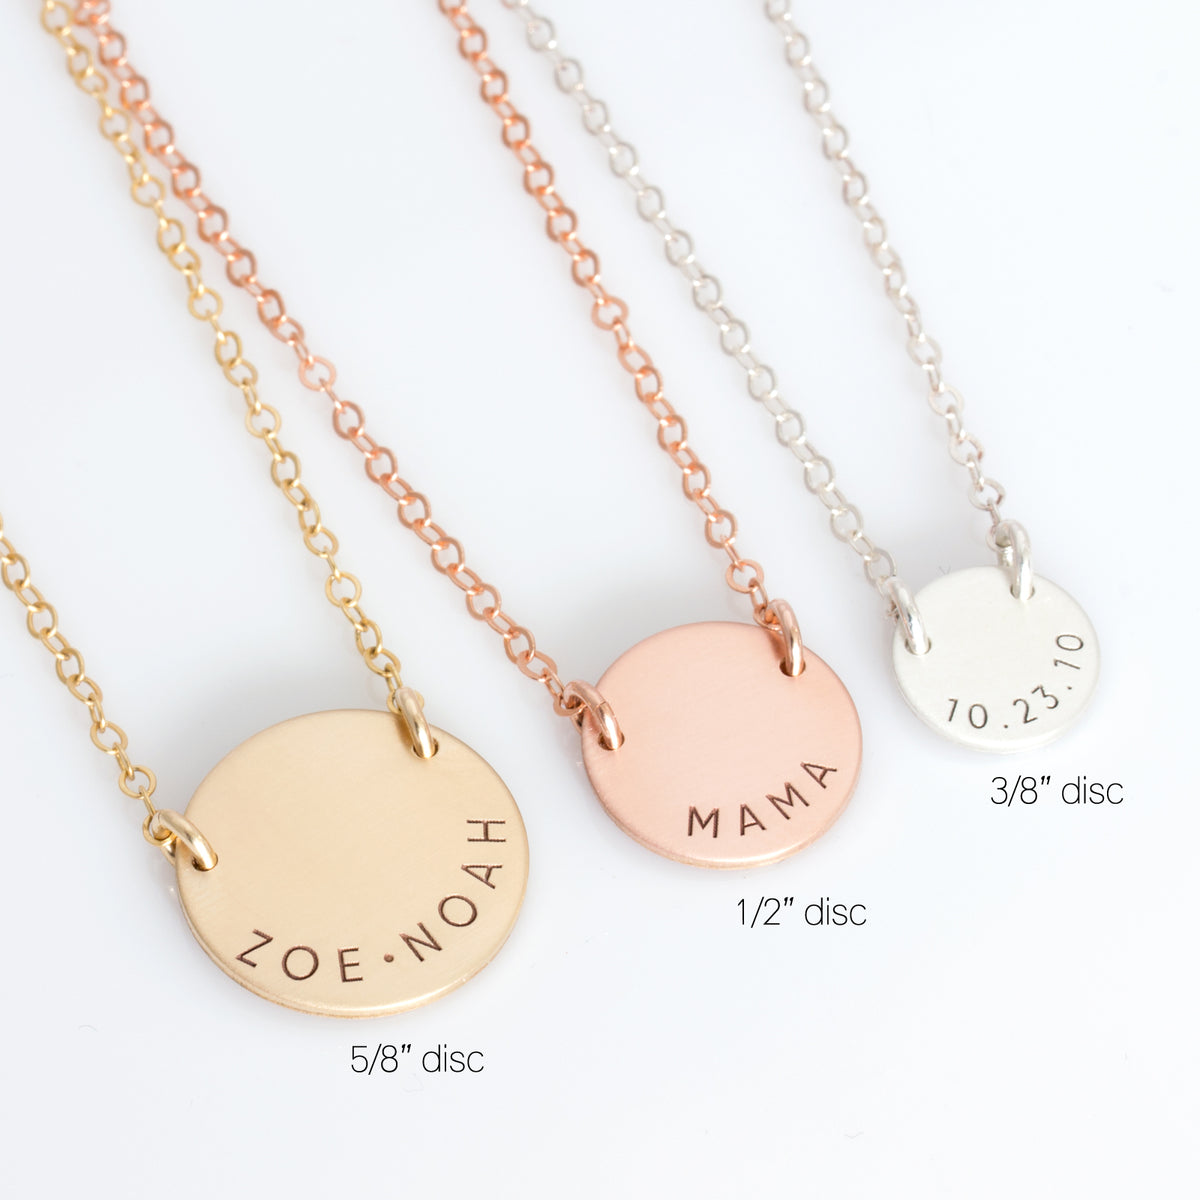 Engraved Name 4-Disc Necklace - 9013933 | HSN